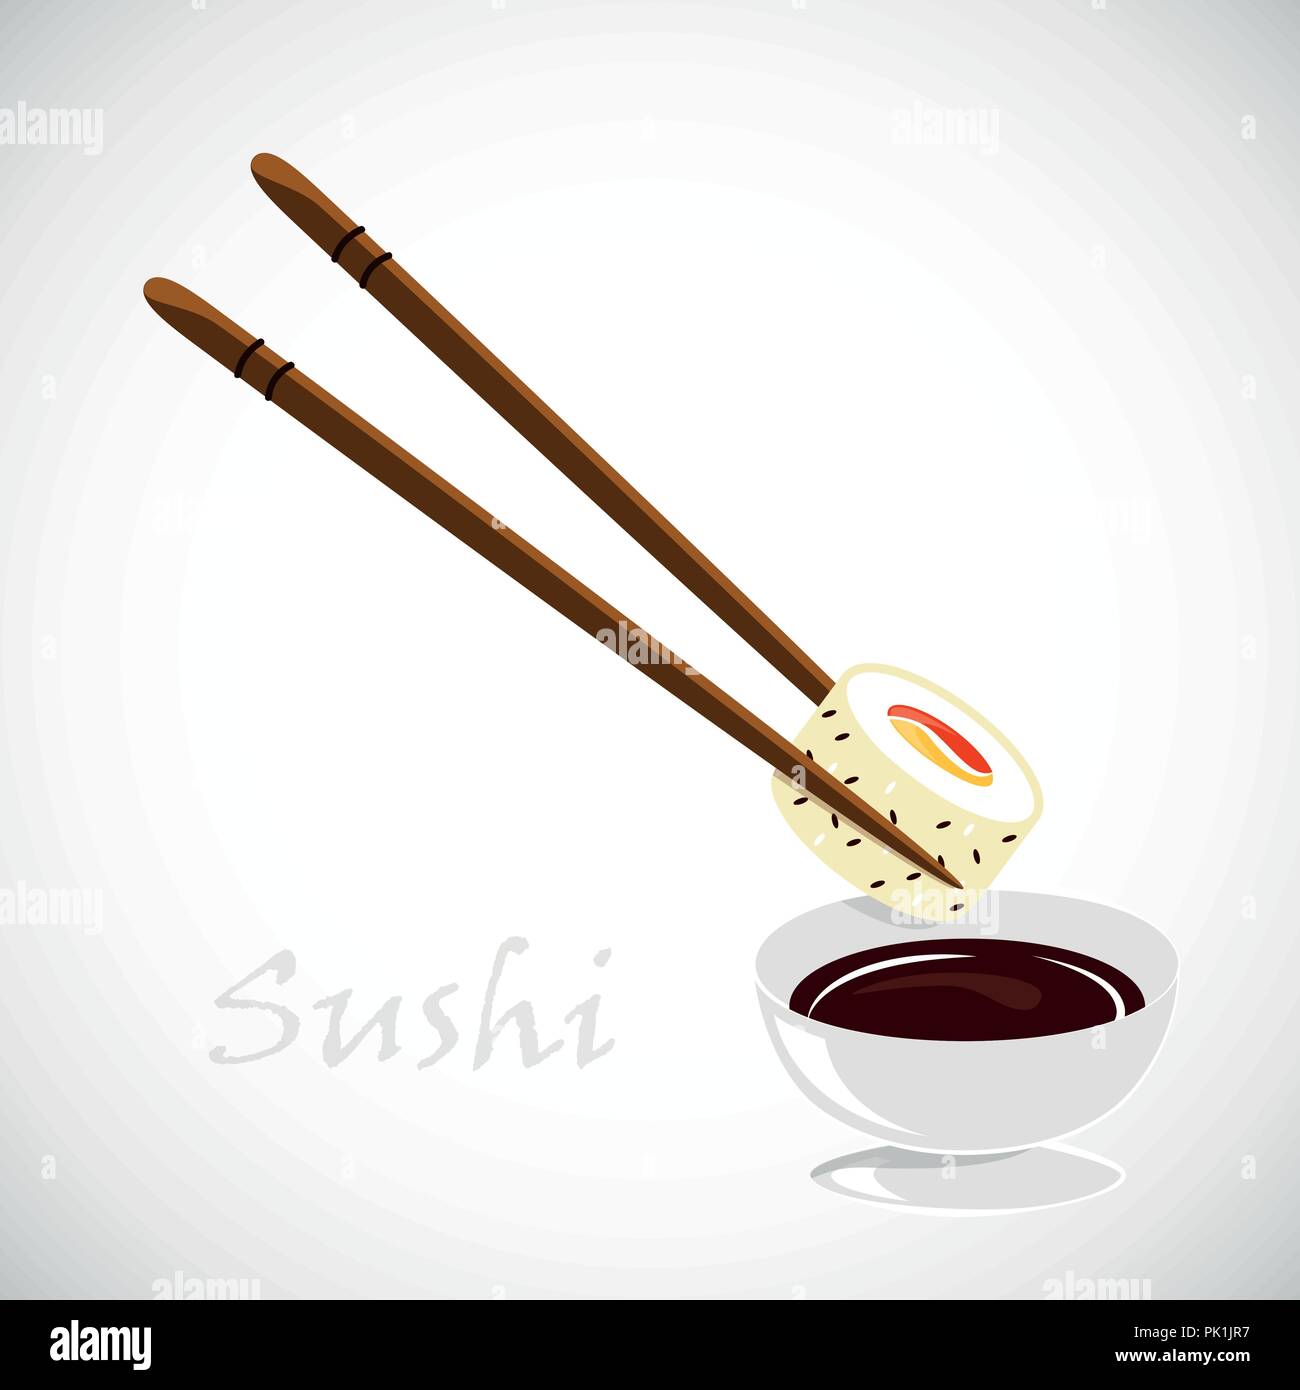 dipping sushi in soy sauce vector illustration EPS10 Stock Vector